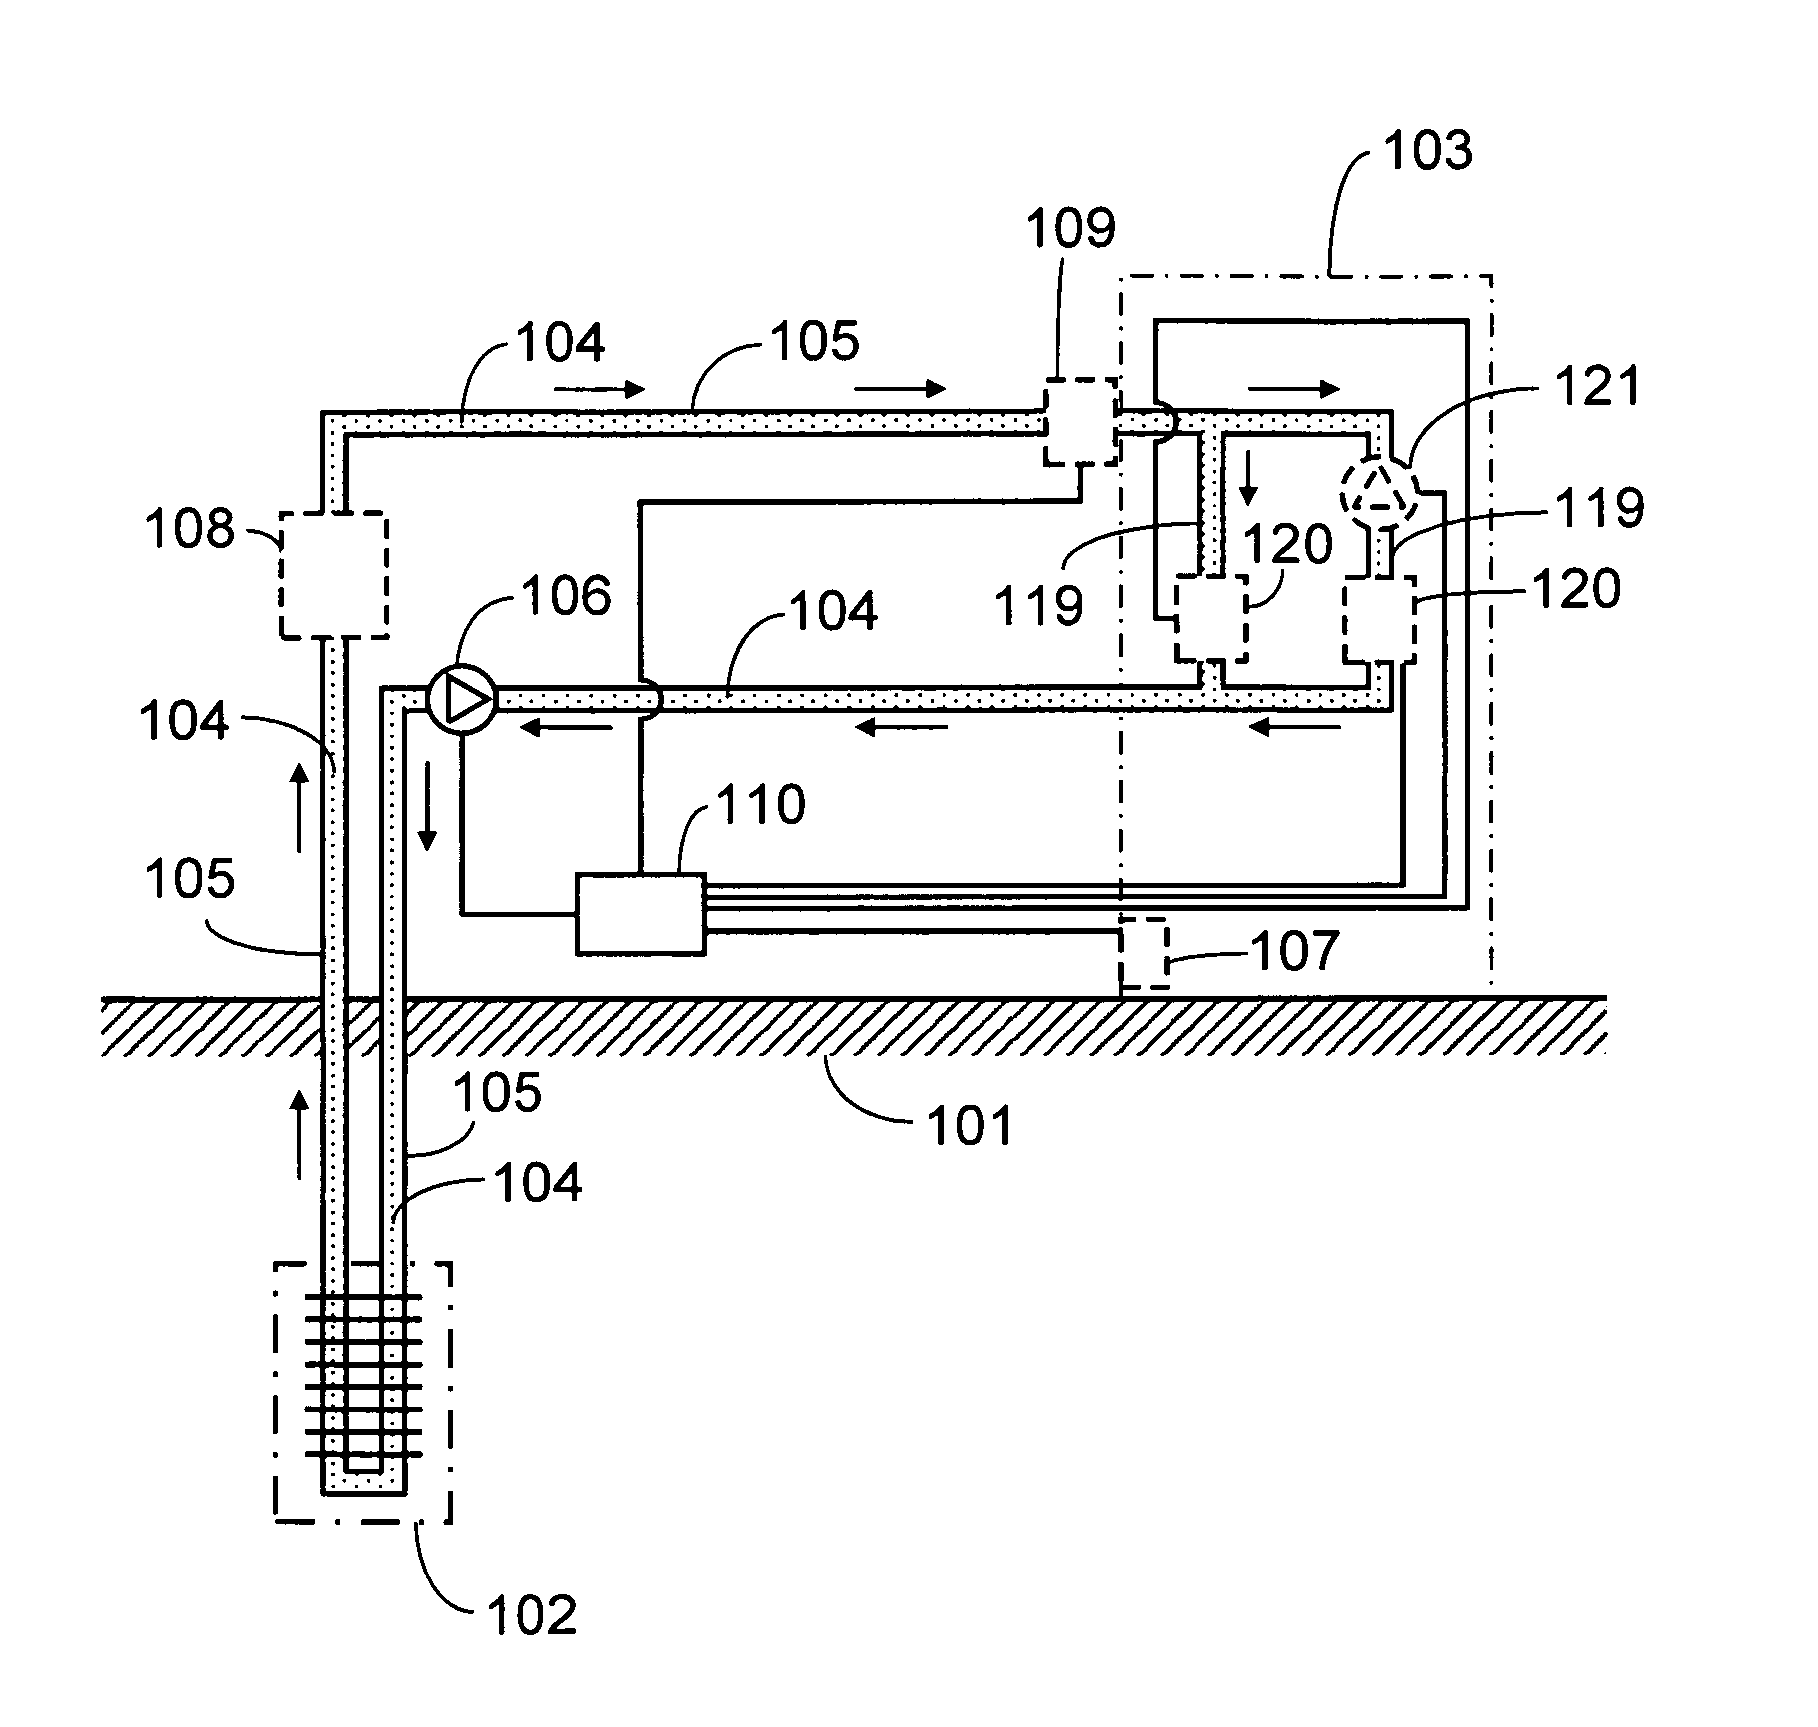 Semiconductor application installation adapted with a temperature equalization system